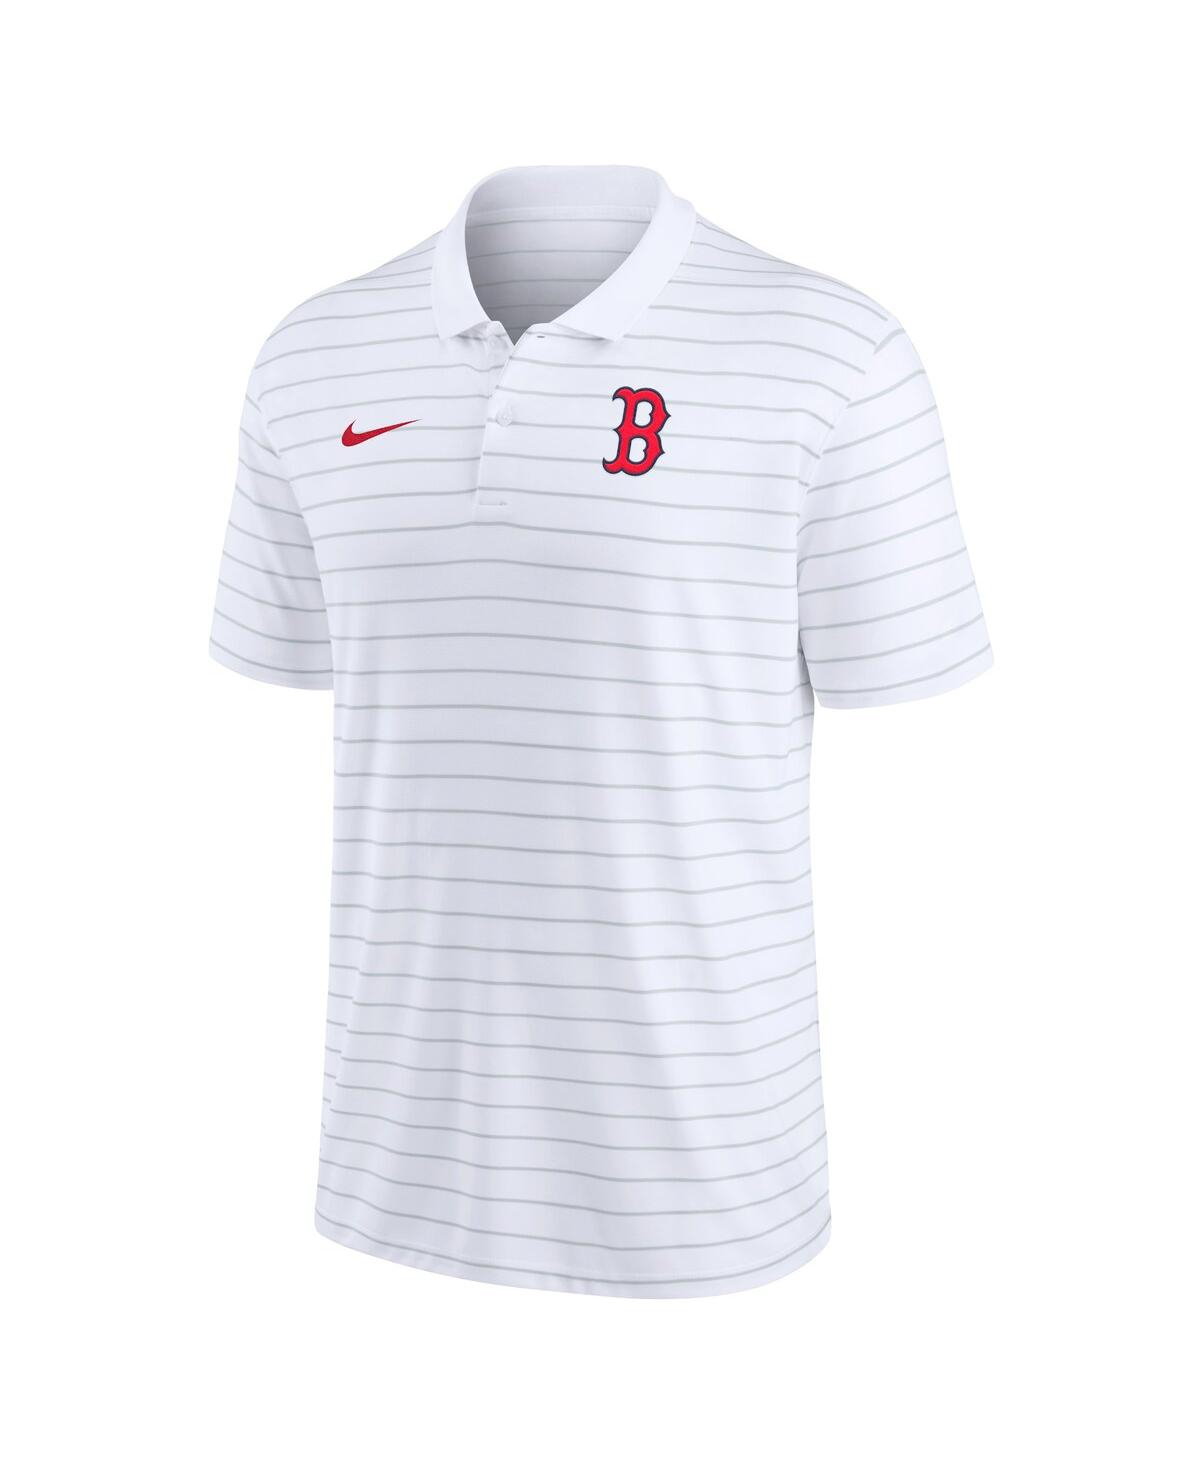 Shop Nike Men's  White Boston Red Sox Authentic Collection Victory Striped Performance Polo Shirt